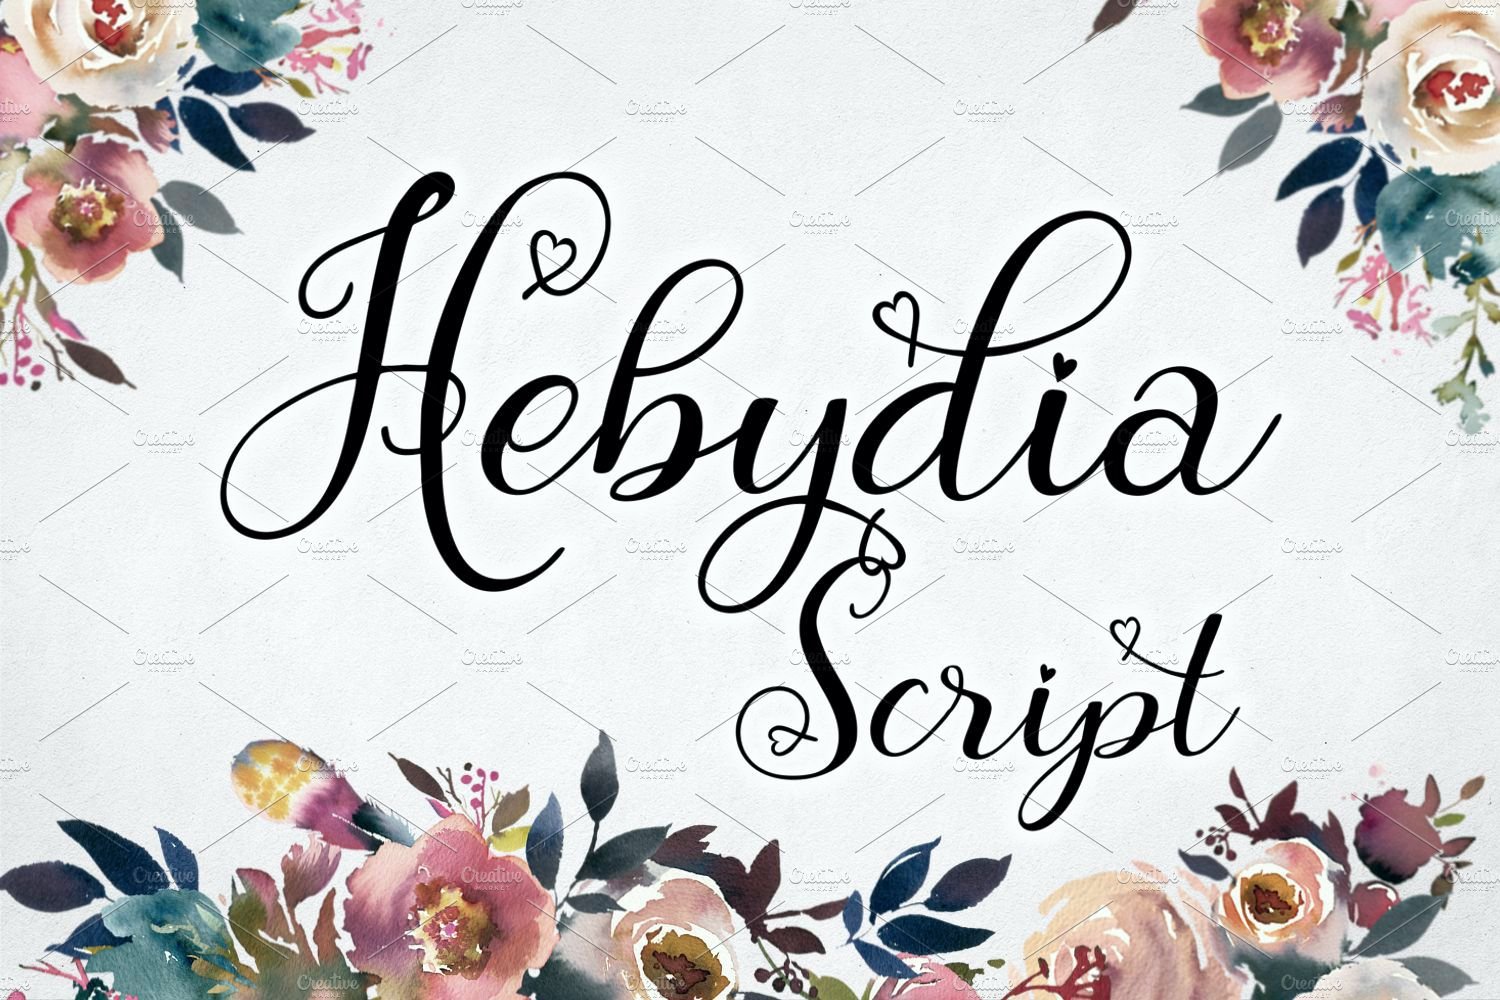 Hebydia cover image.